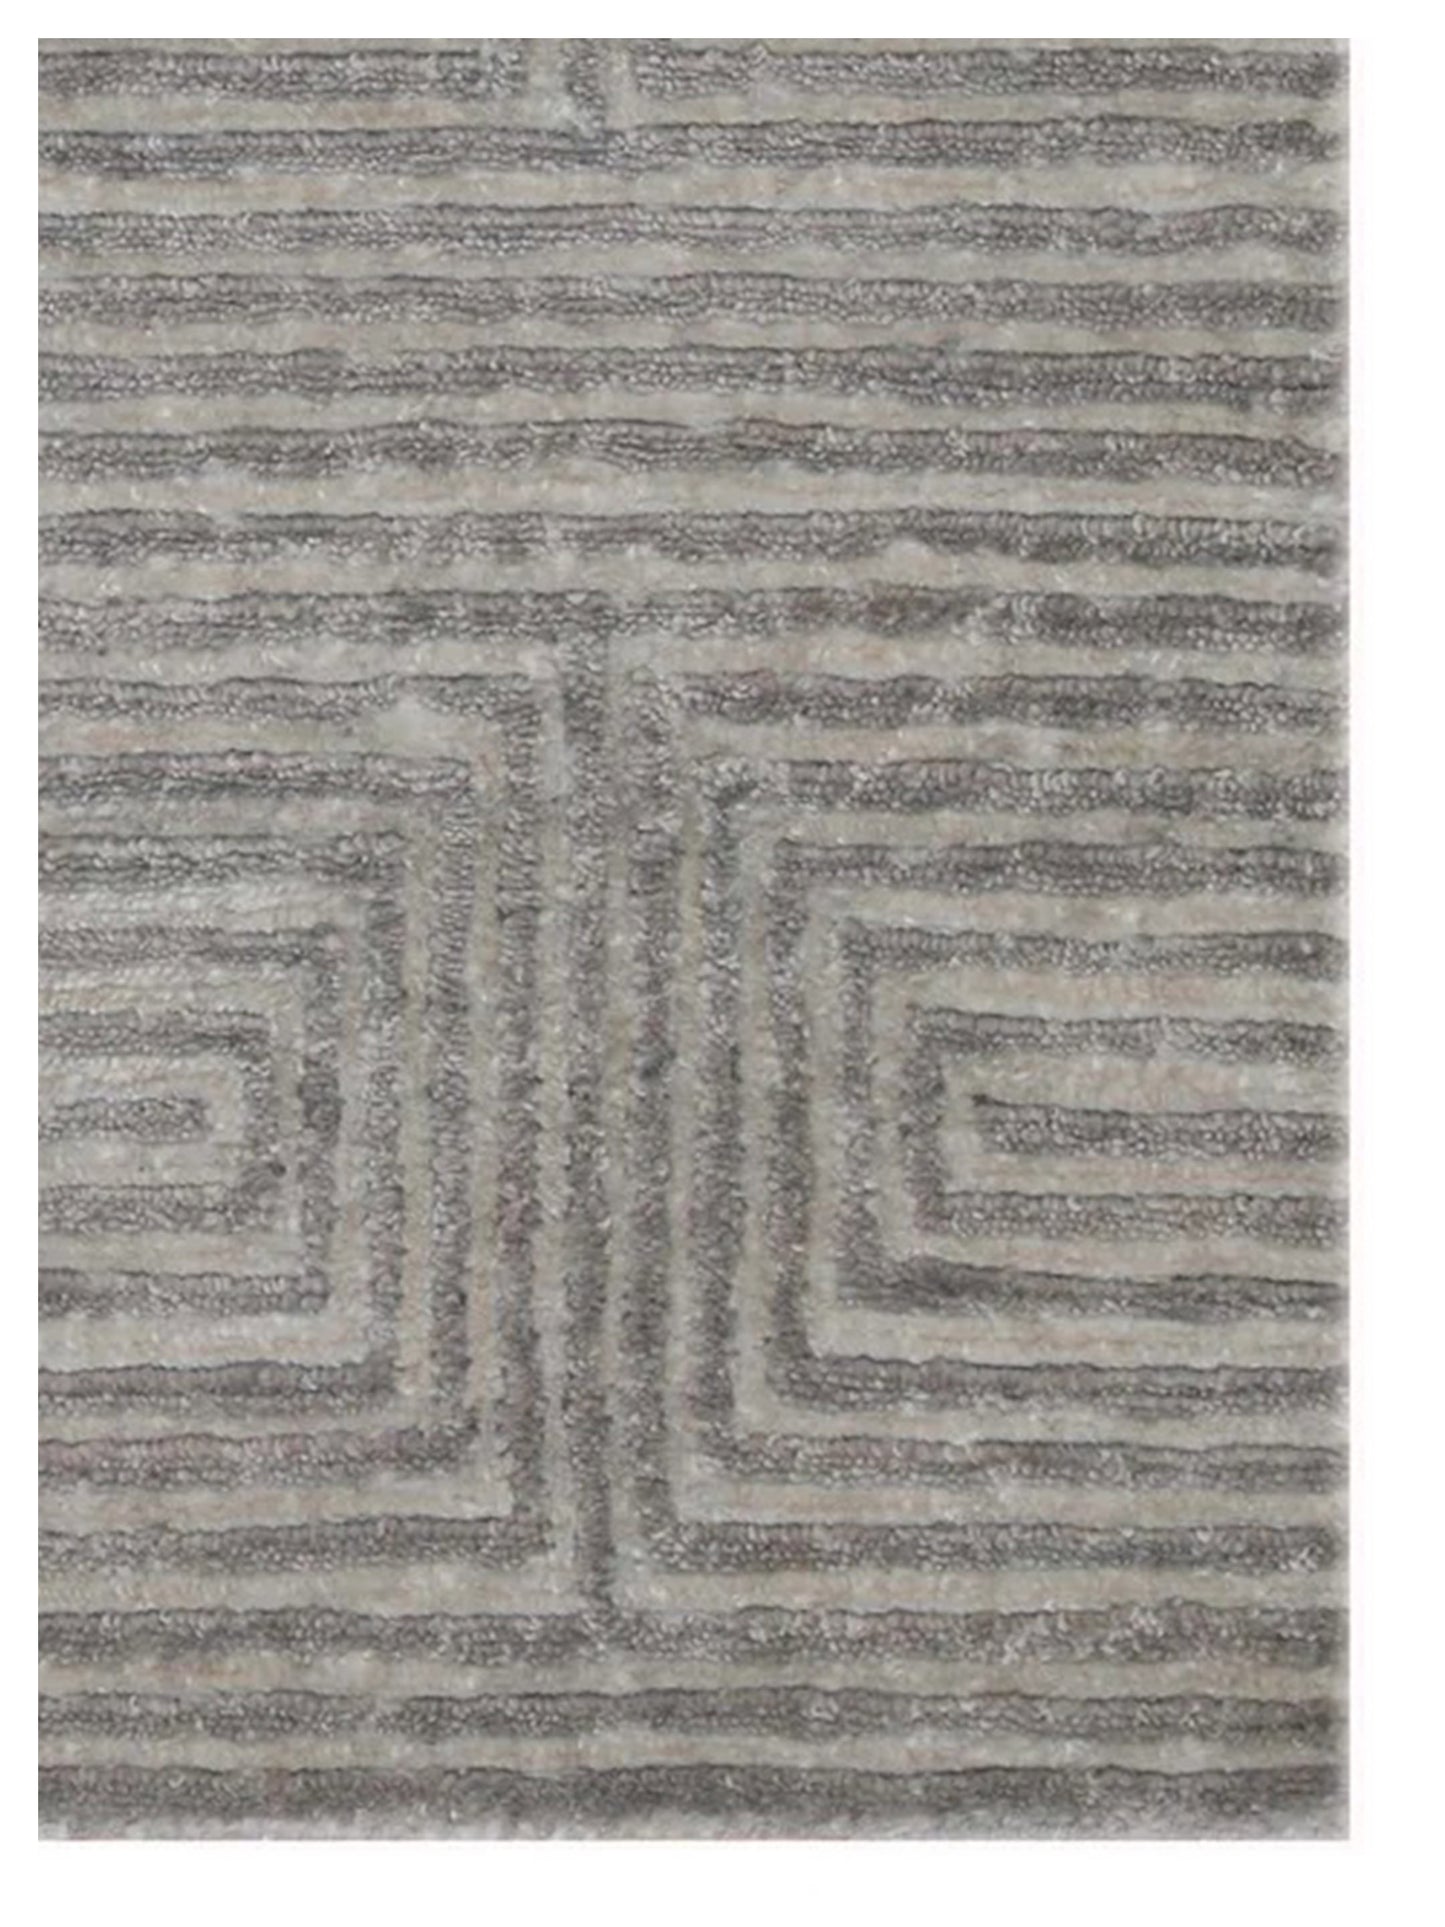 Artisan Mary  Wheat  Contemporary Knotted Rug